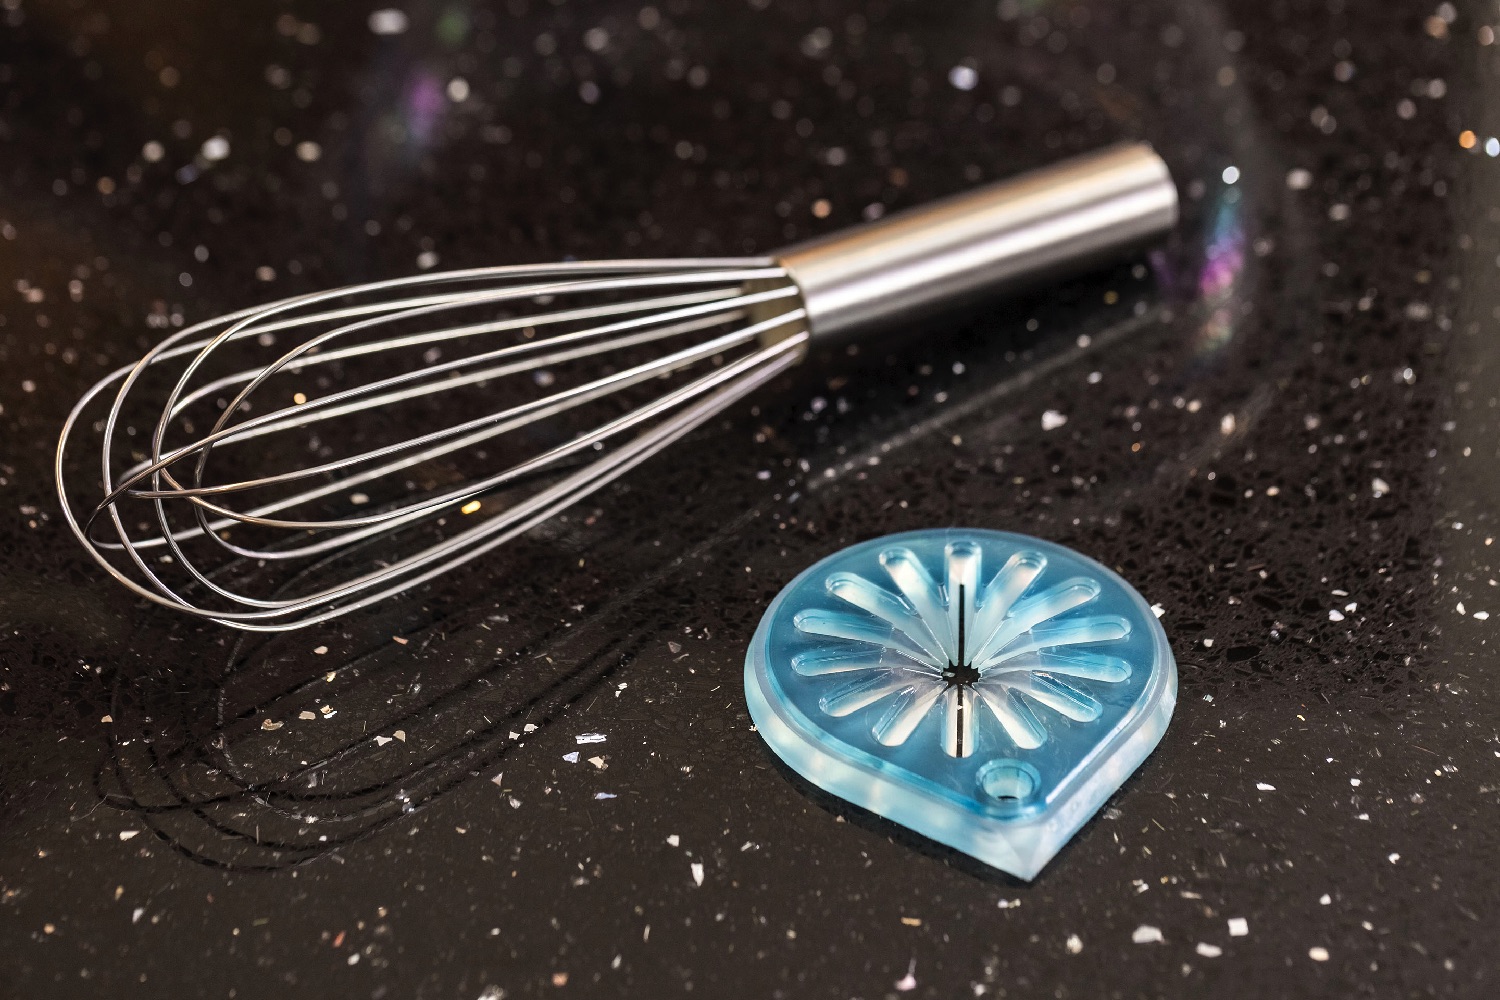 Say goodbye to whisk cleaning woes with new 3D printed Whisk Wiper